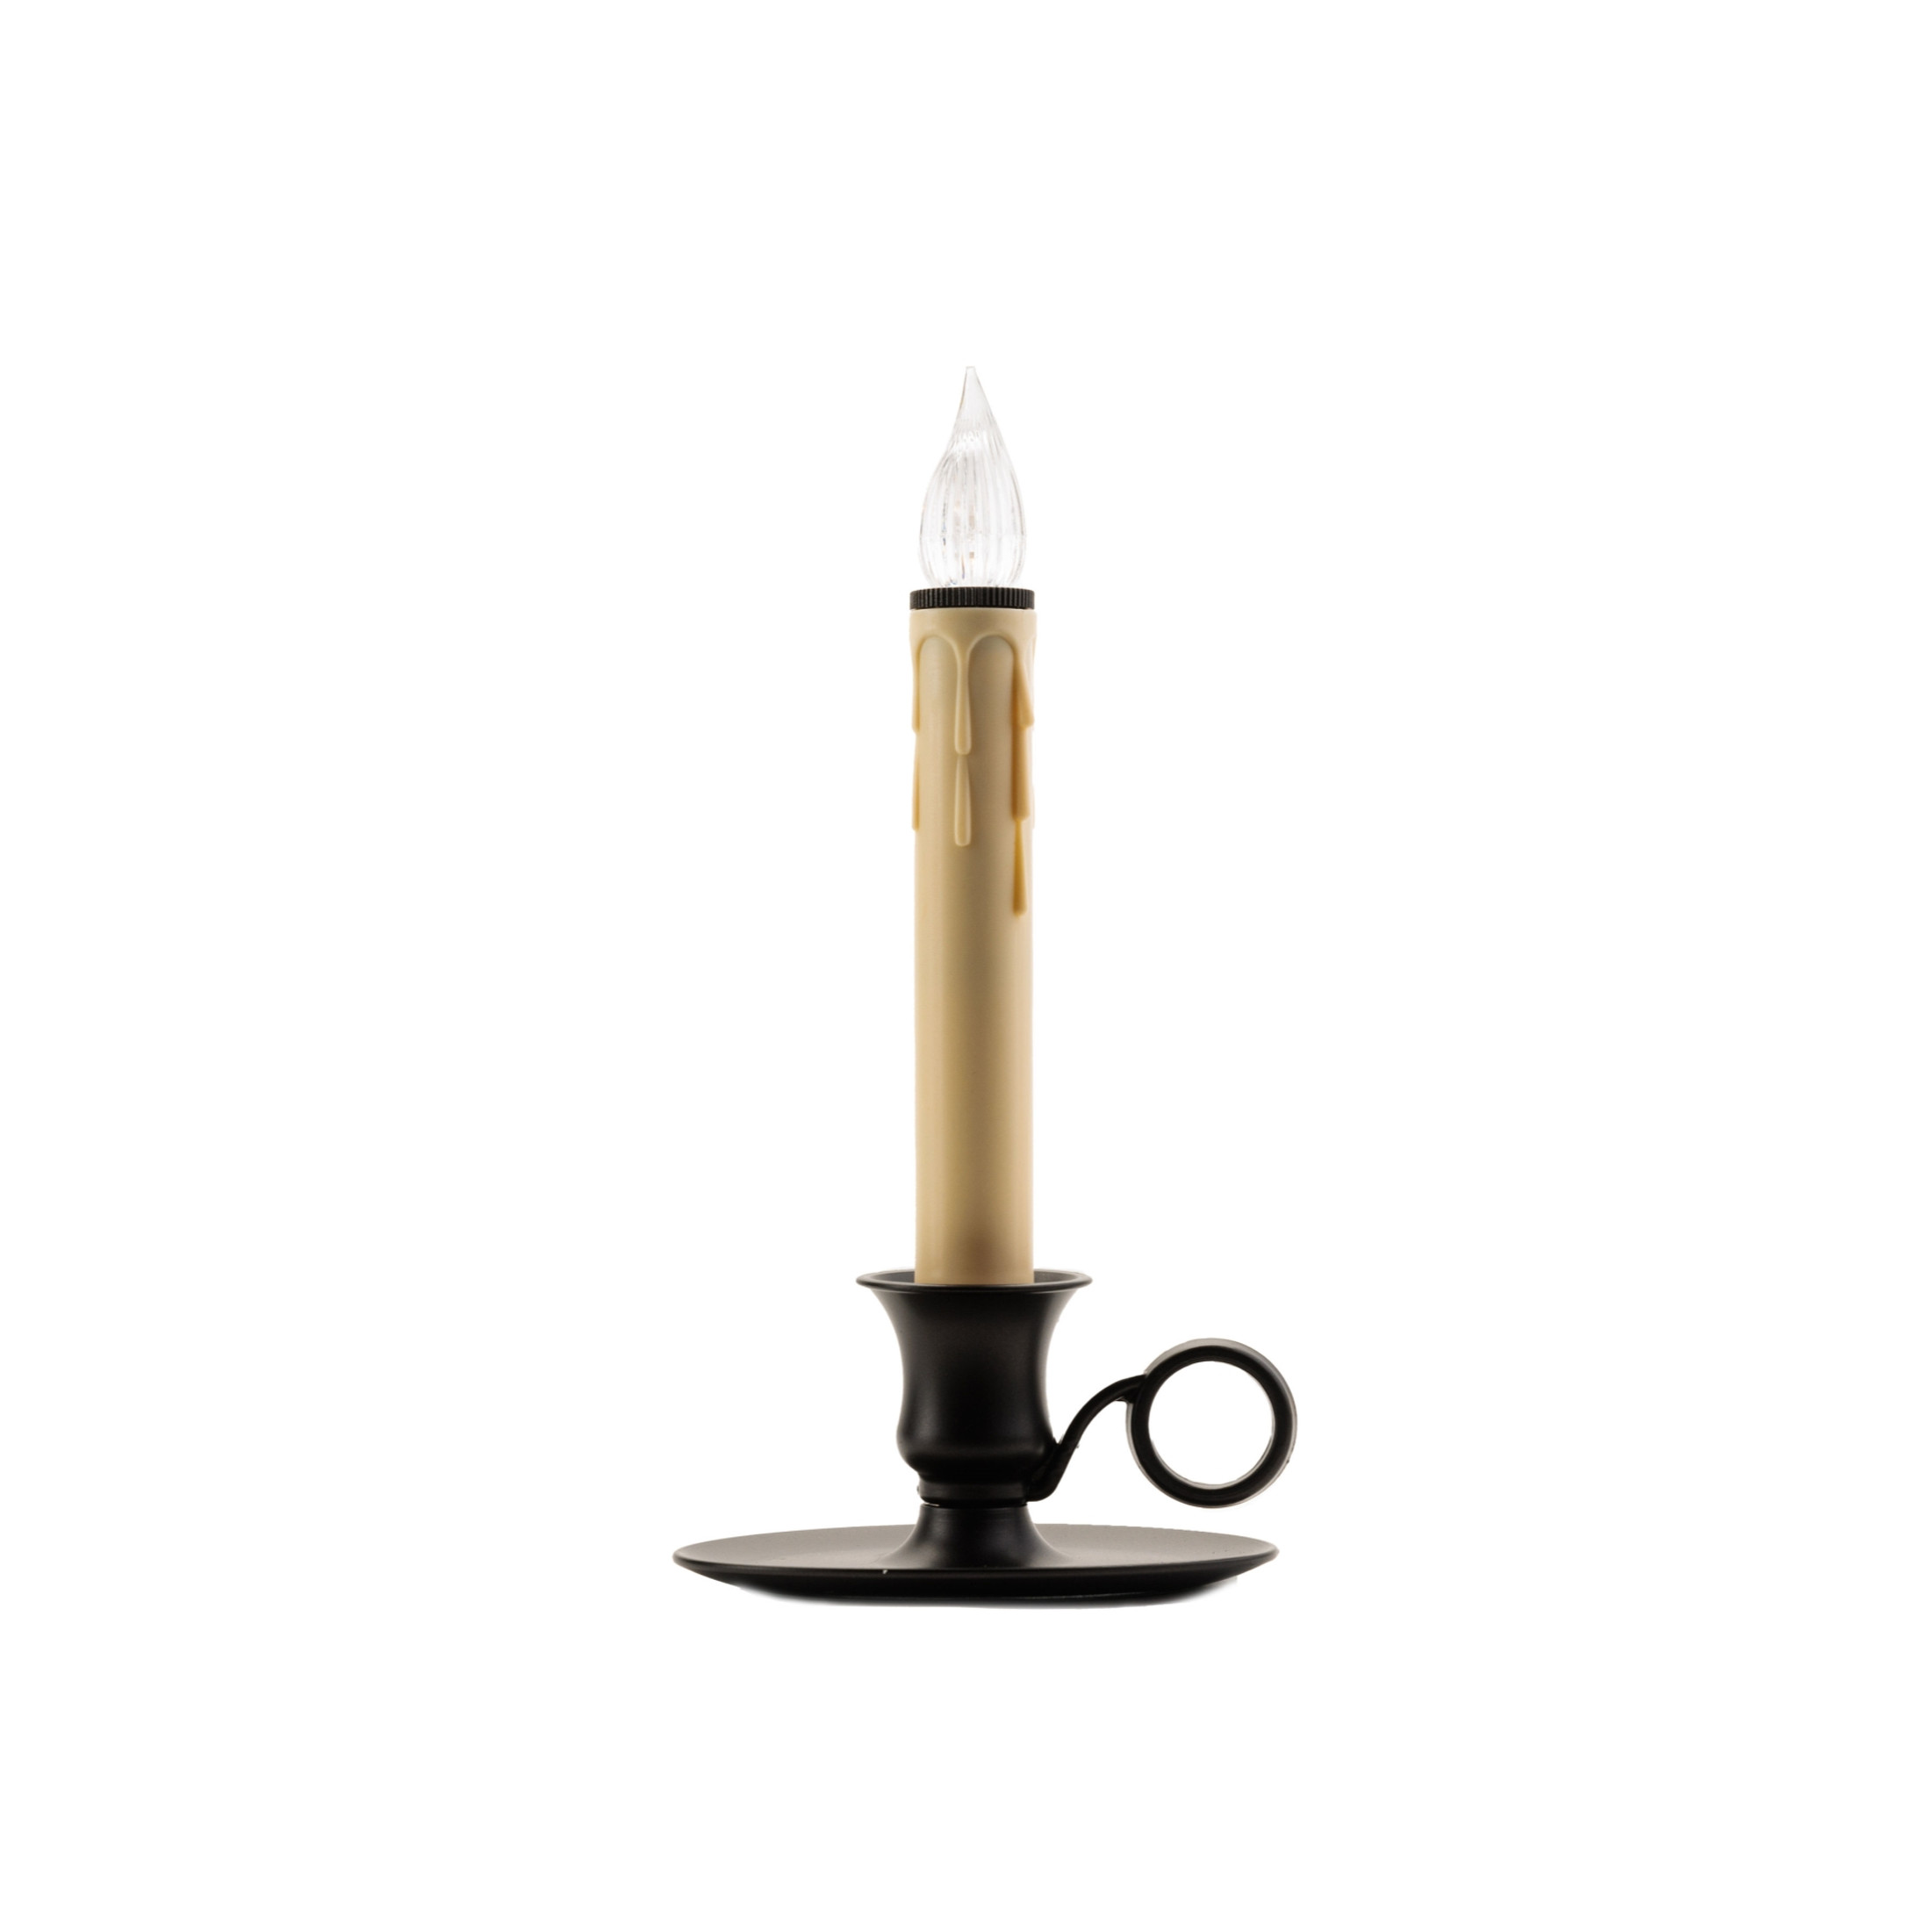 IMC Williamsburg Battery Operated LED Candle with On/Off Sensor, Wax Drips - Antique Bronze, 9"